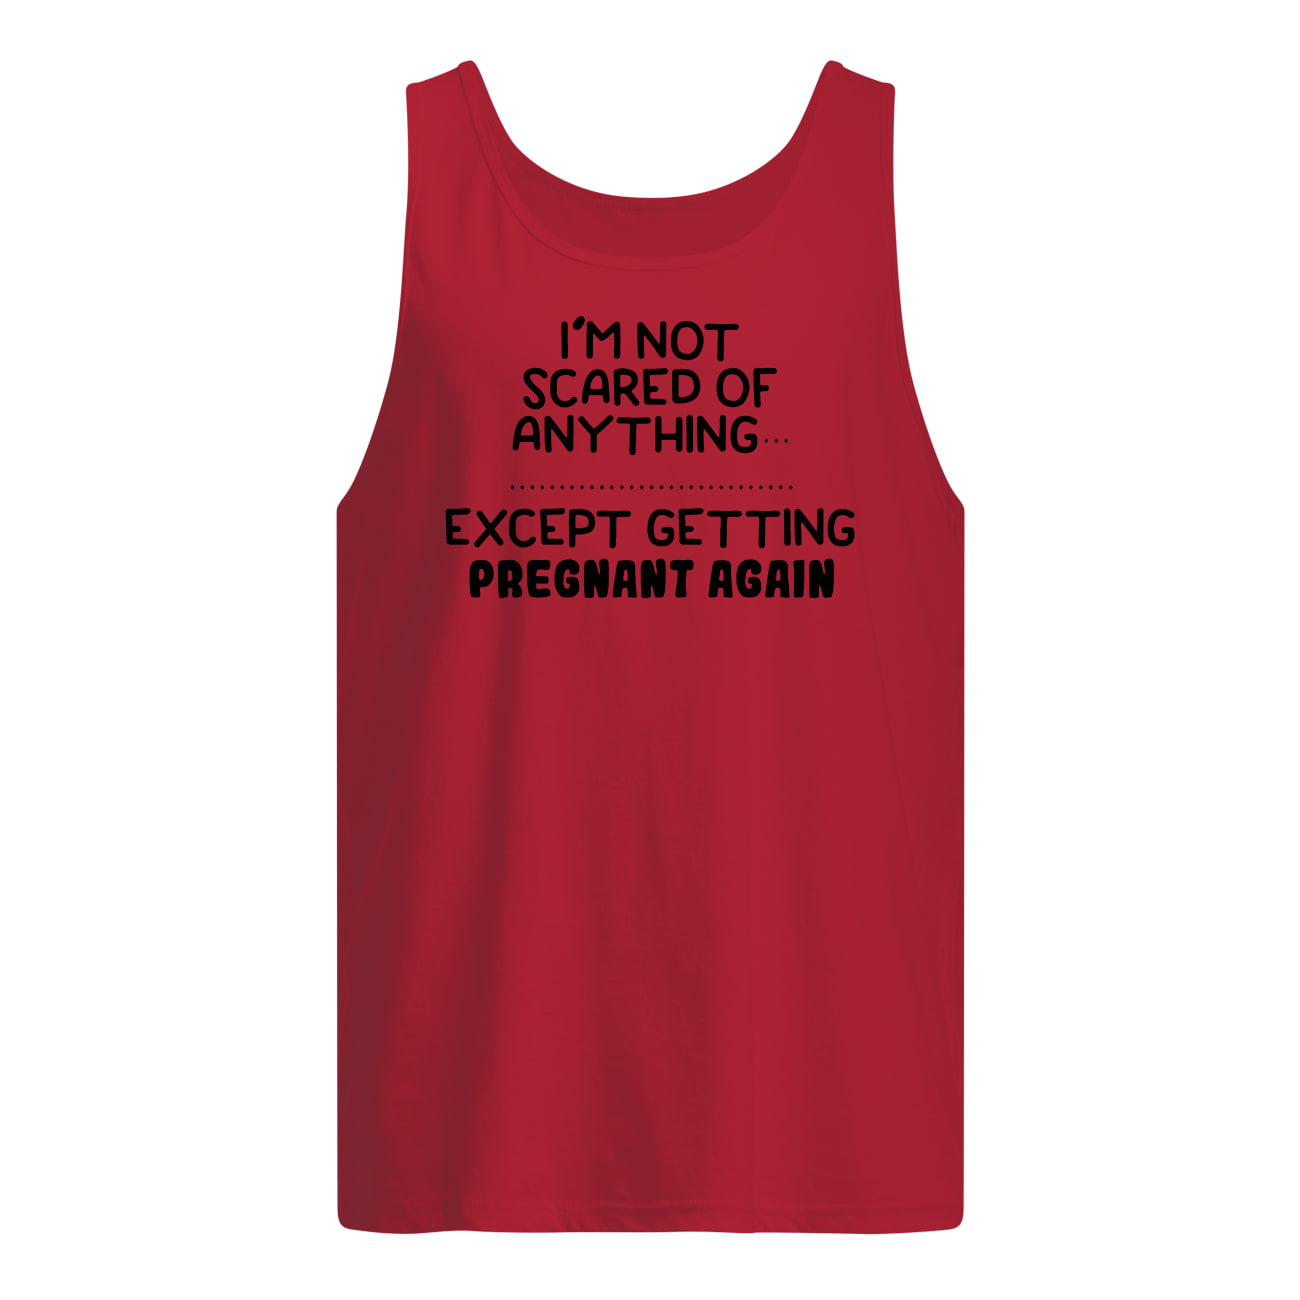 I'm not scared of anything except getting pregnant again tank top